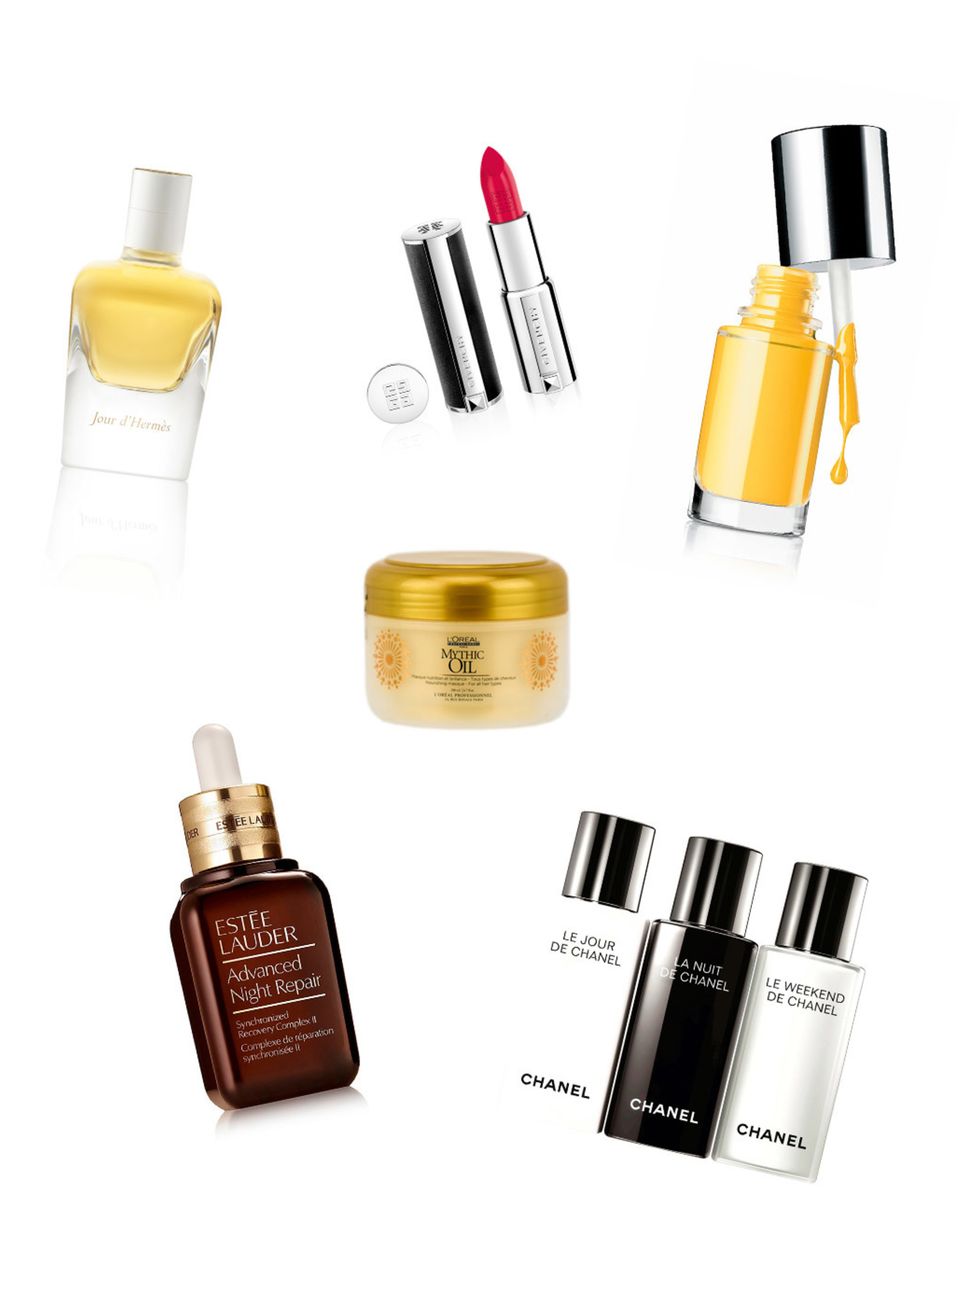 &lt;p&gt;Just 14 products have been singled out as the very best performers by ELLE International beauty directors and editors from 44 countries &ndash; a major accolade. Here, we introduce the winners. Add to basket, now&hellip;&lt;/p&gt;